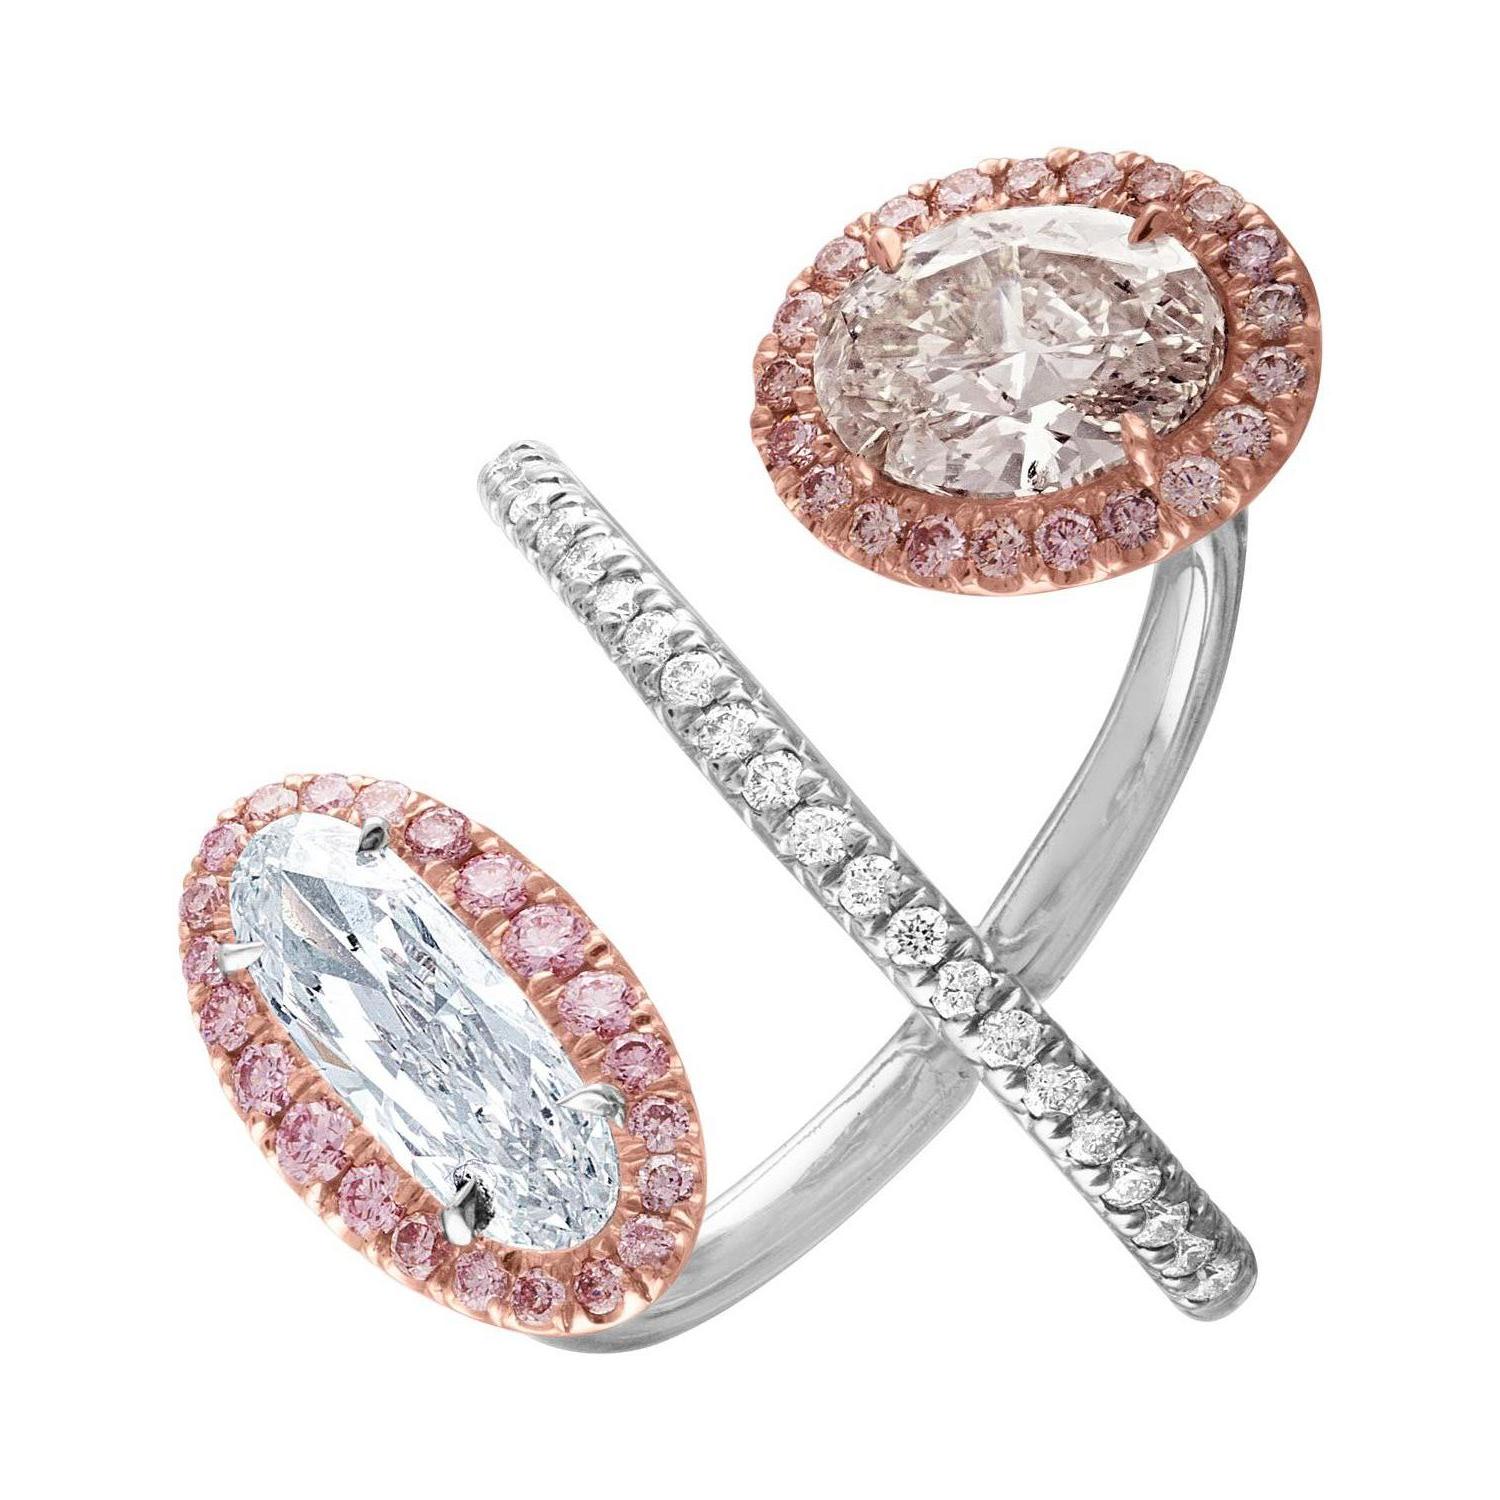 Contemporary GIA Certified White Oval Diamond and GIA Certified Brown-Pink Diamond Ring